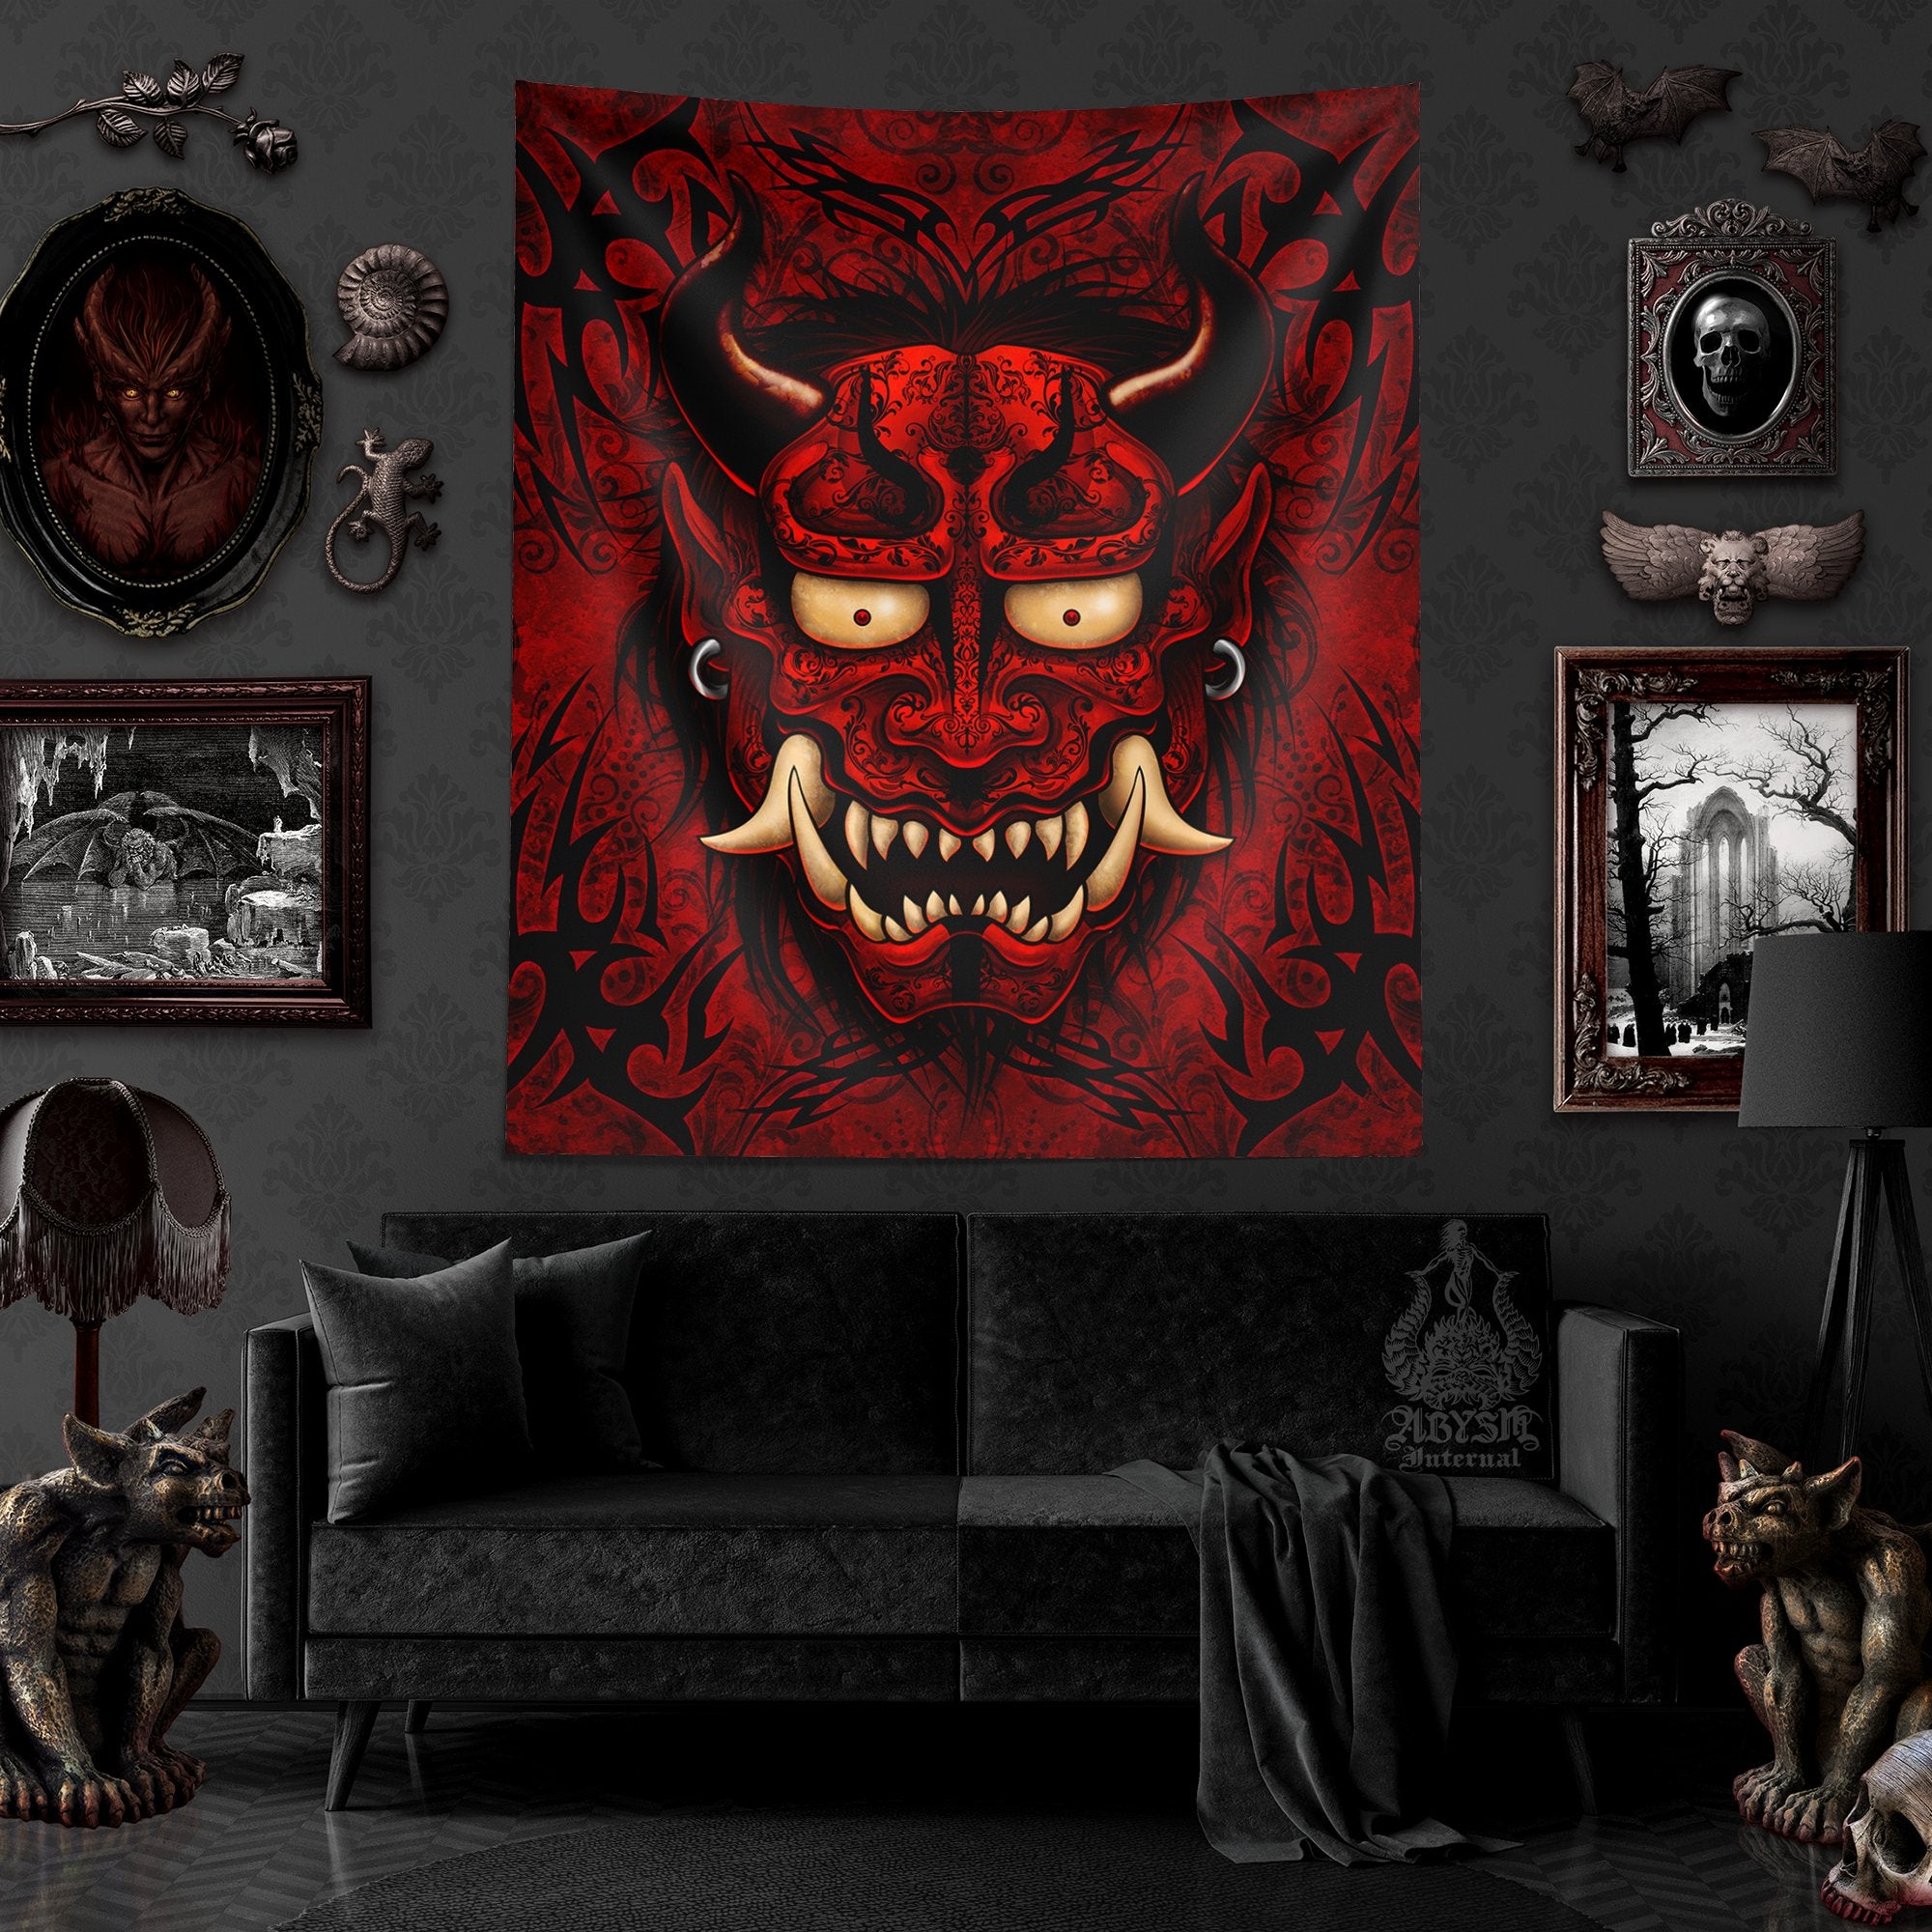 Goth Tapestry, Gothic Wall Hanging, Japanese Demon, Gamer Home Decor, Vertical Art Print - Red & Black Oni - Abysm Internal